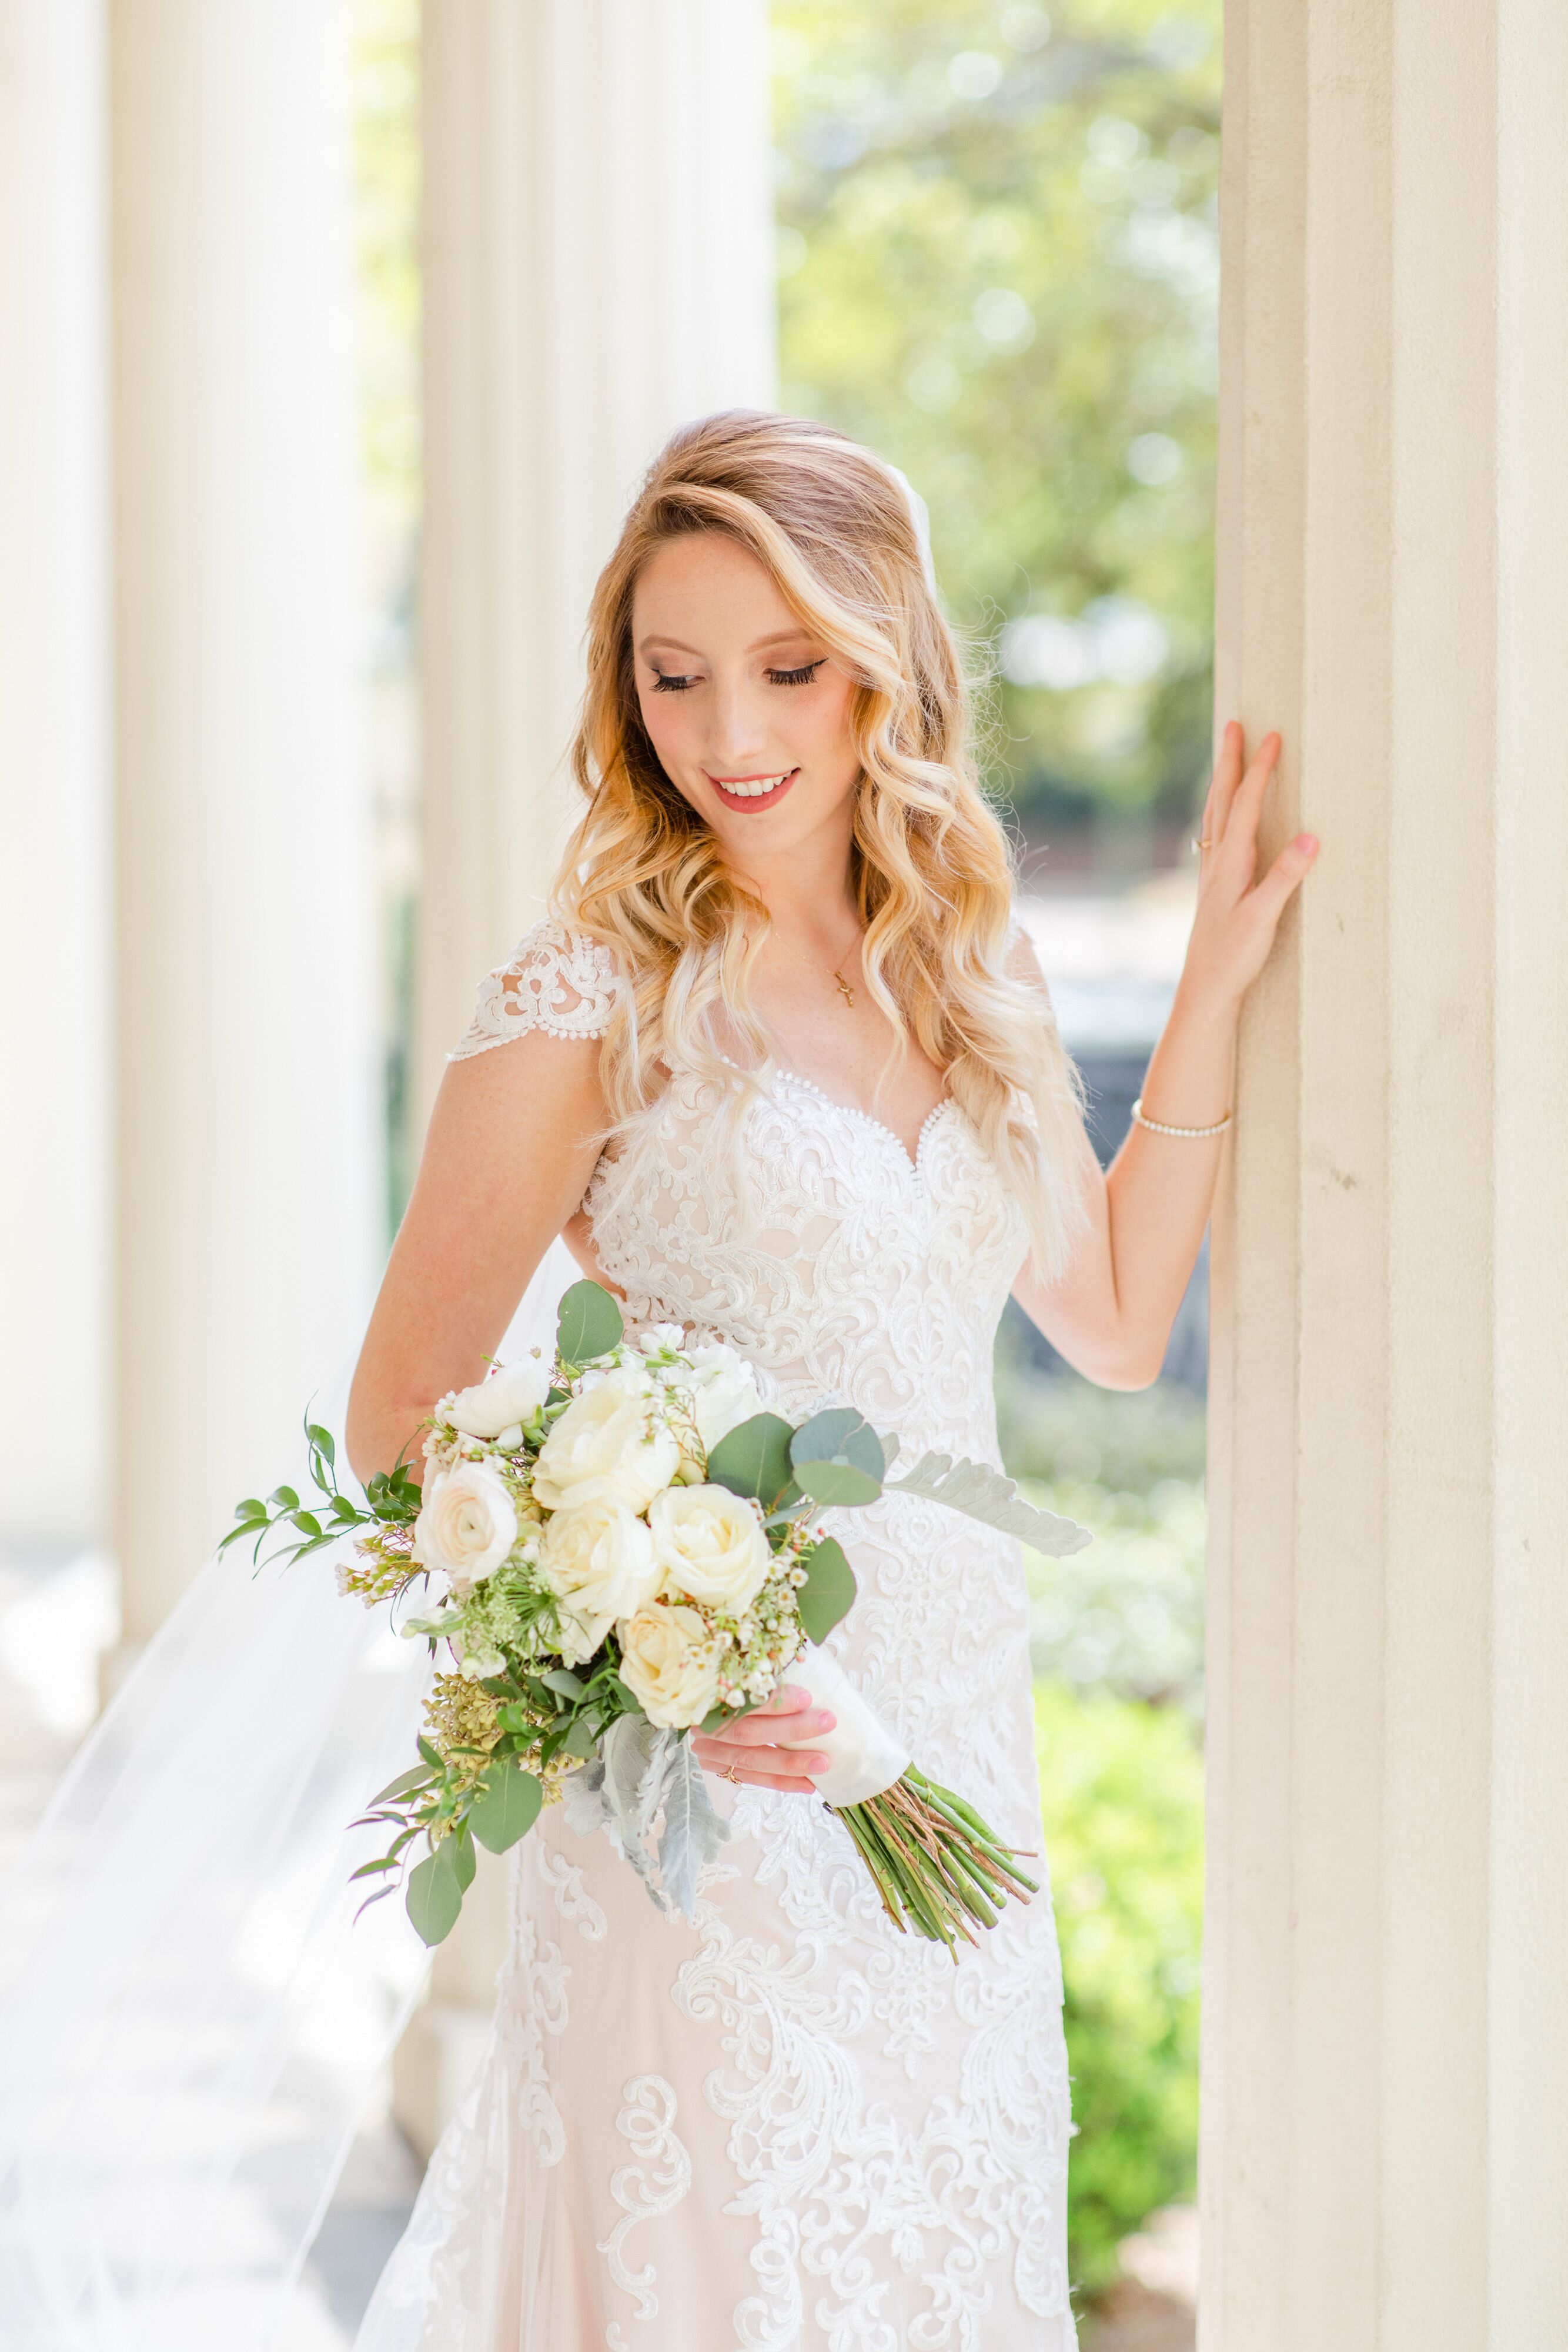 Bridal Sessions  My Secret Obsession - Anna Filly Photography